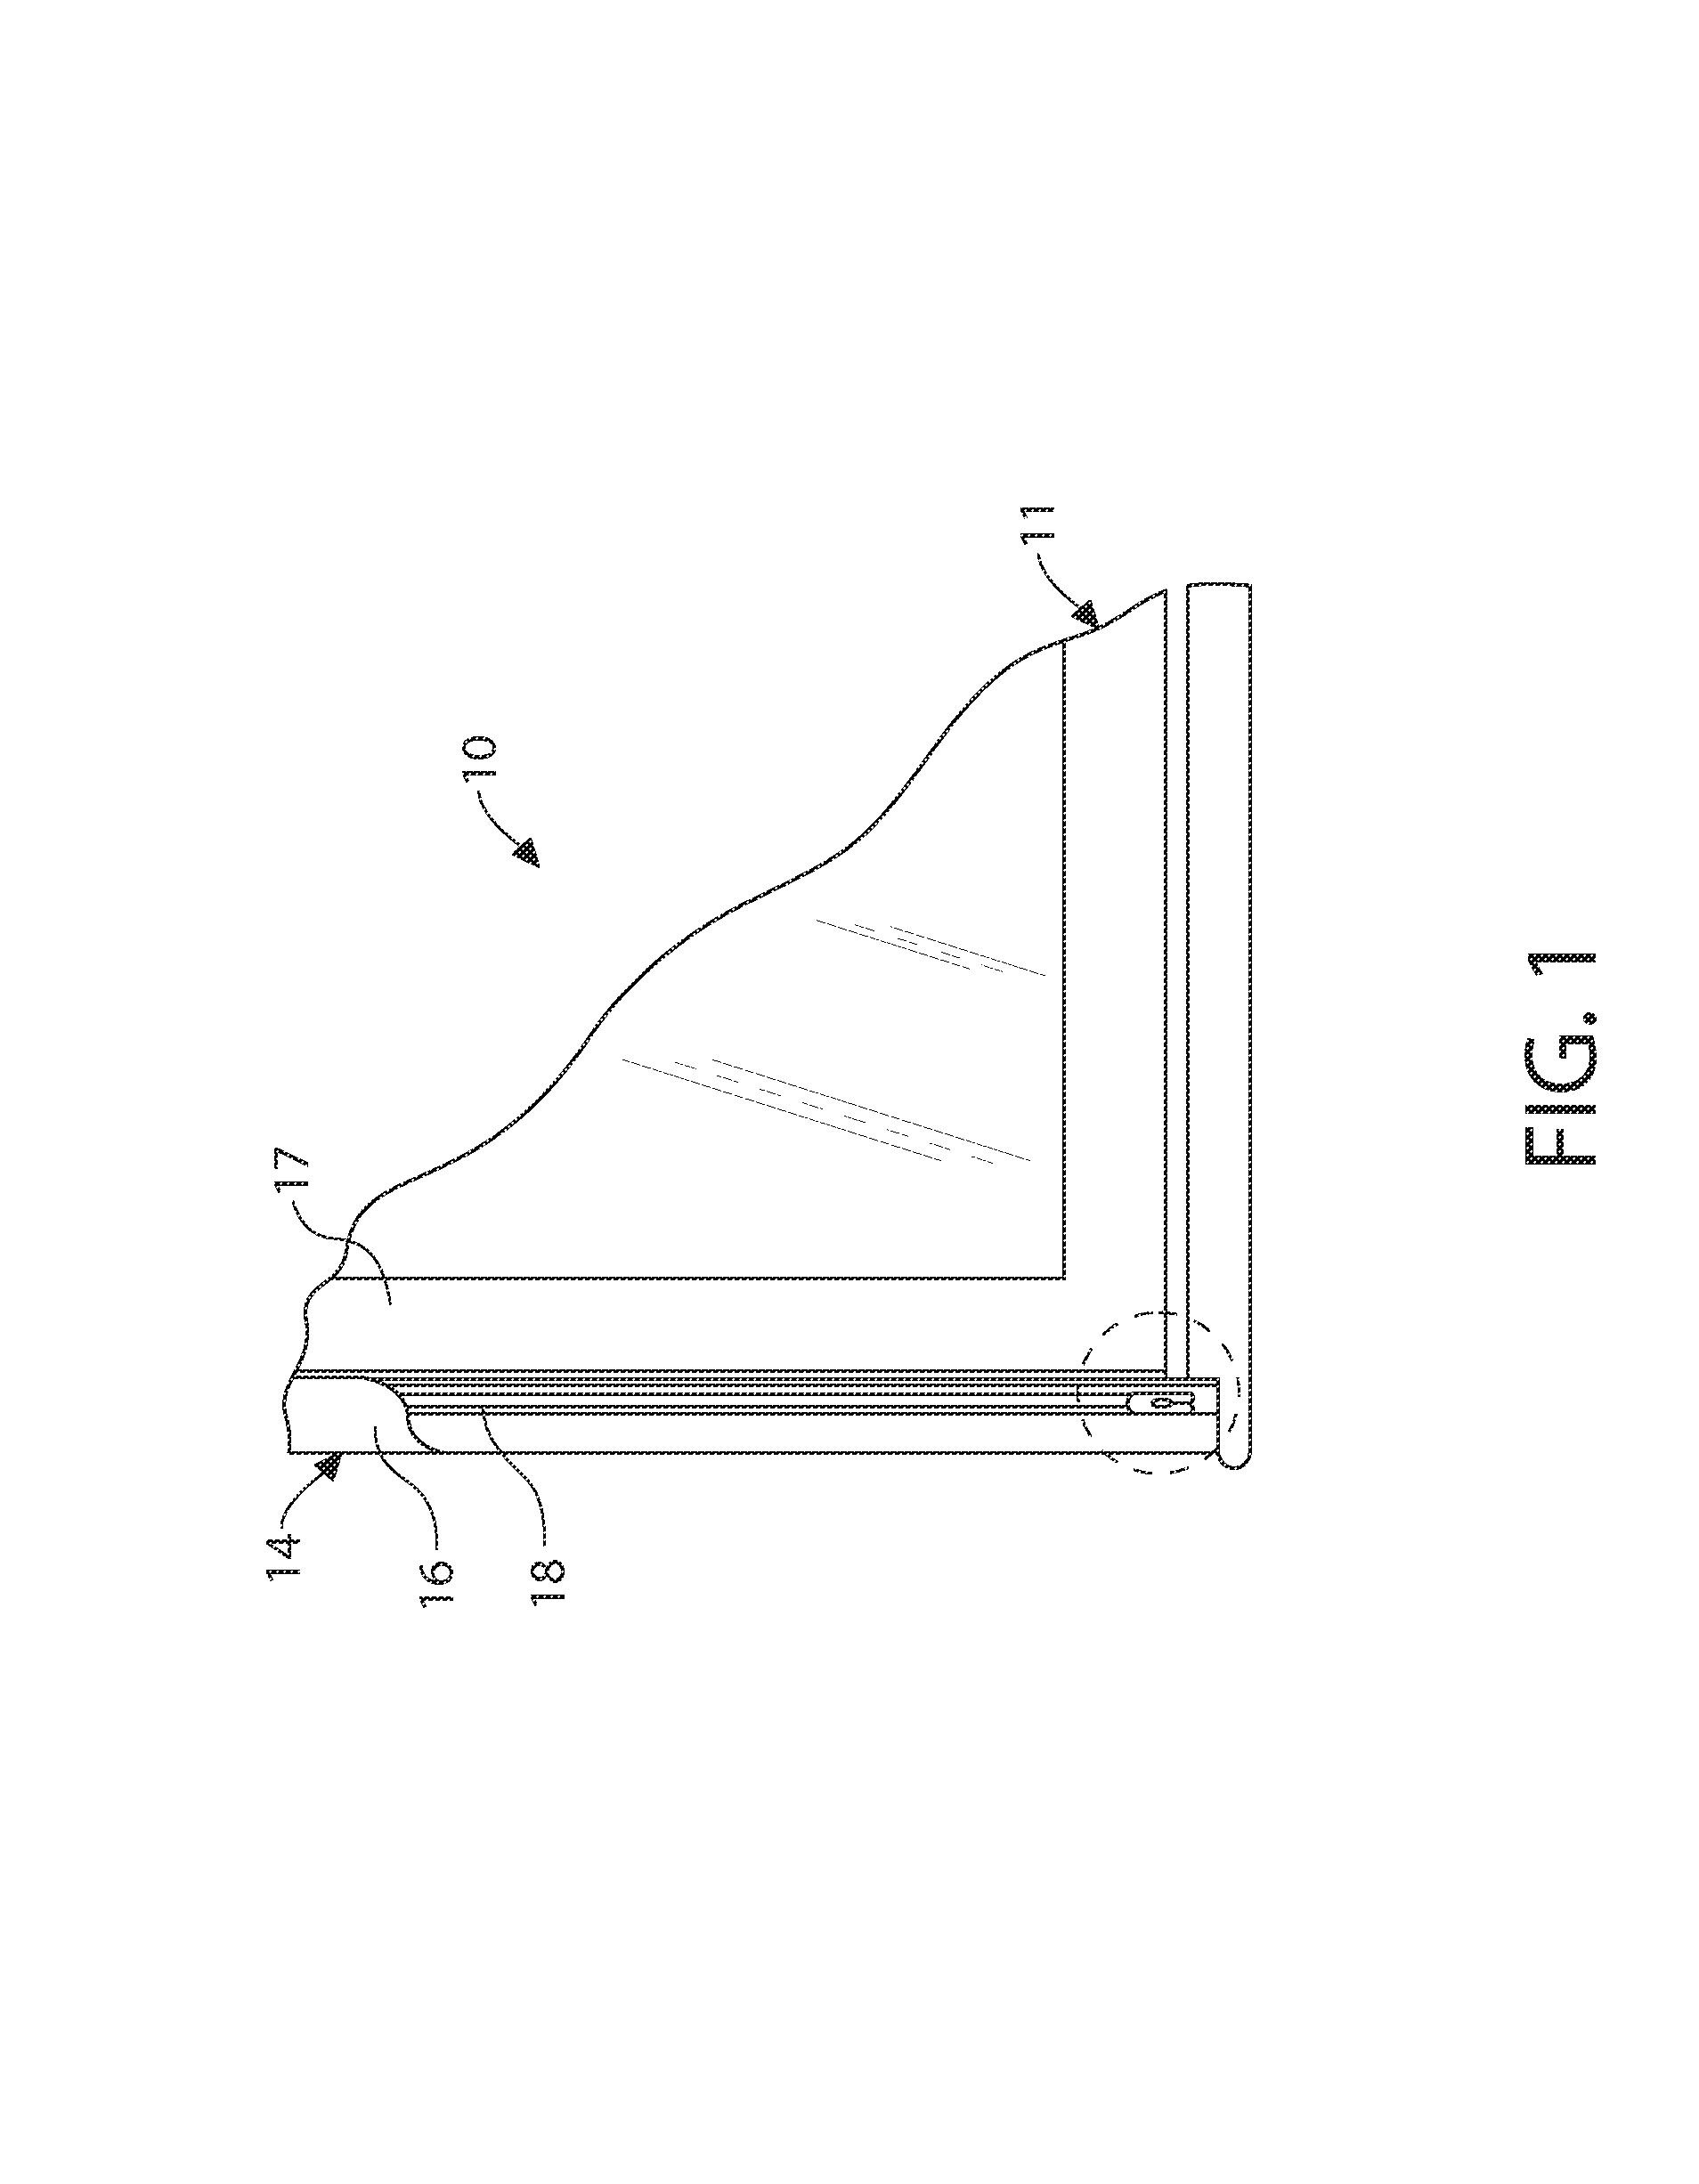 Rounded shoe and position brake assembly for the counterbalance system of a tilt-in window